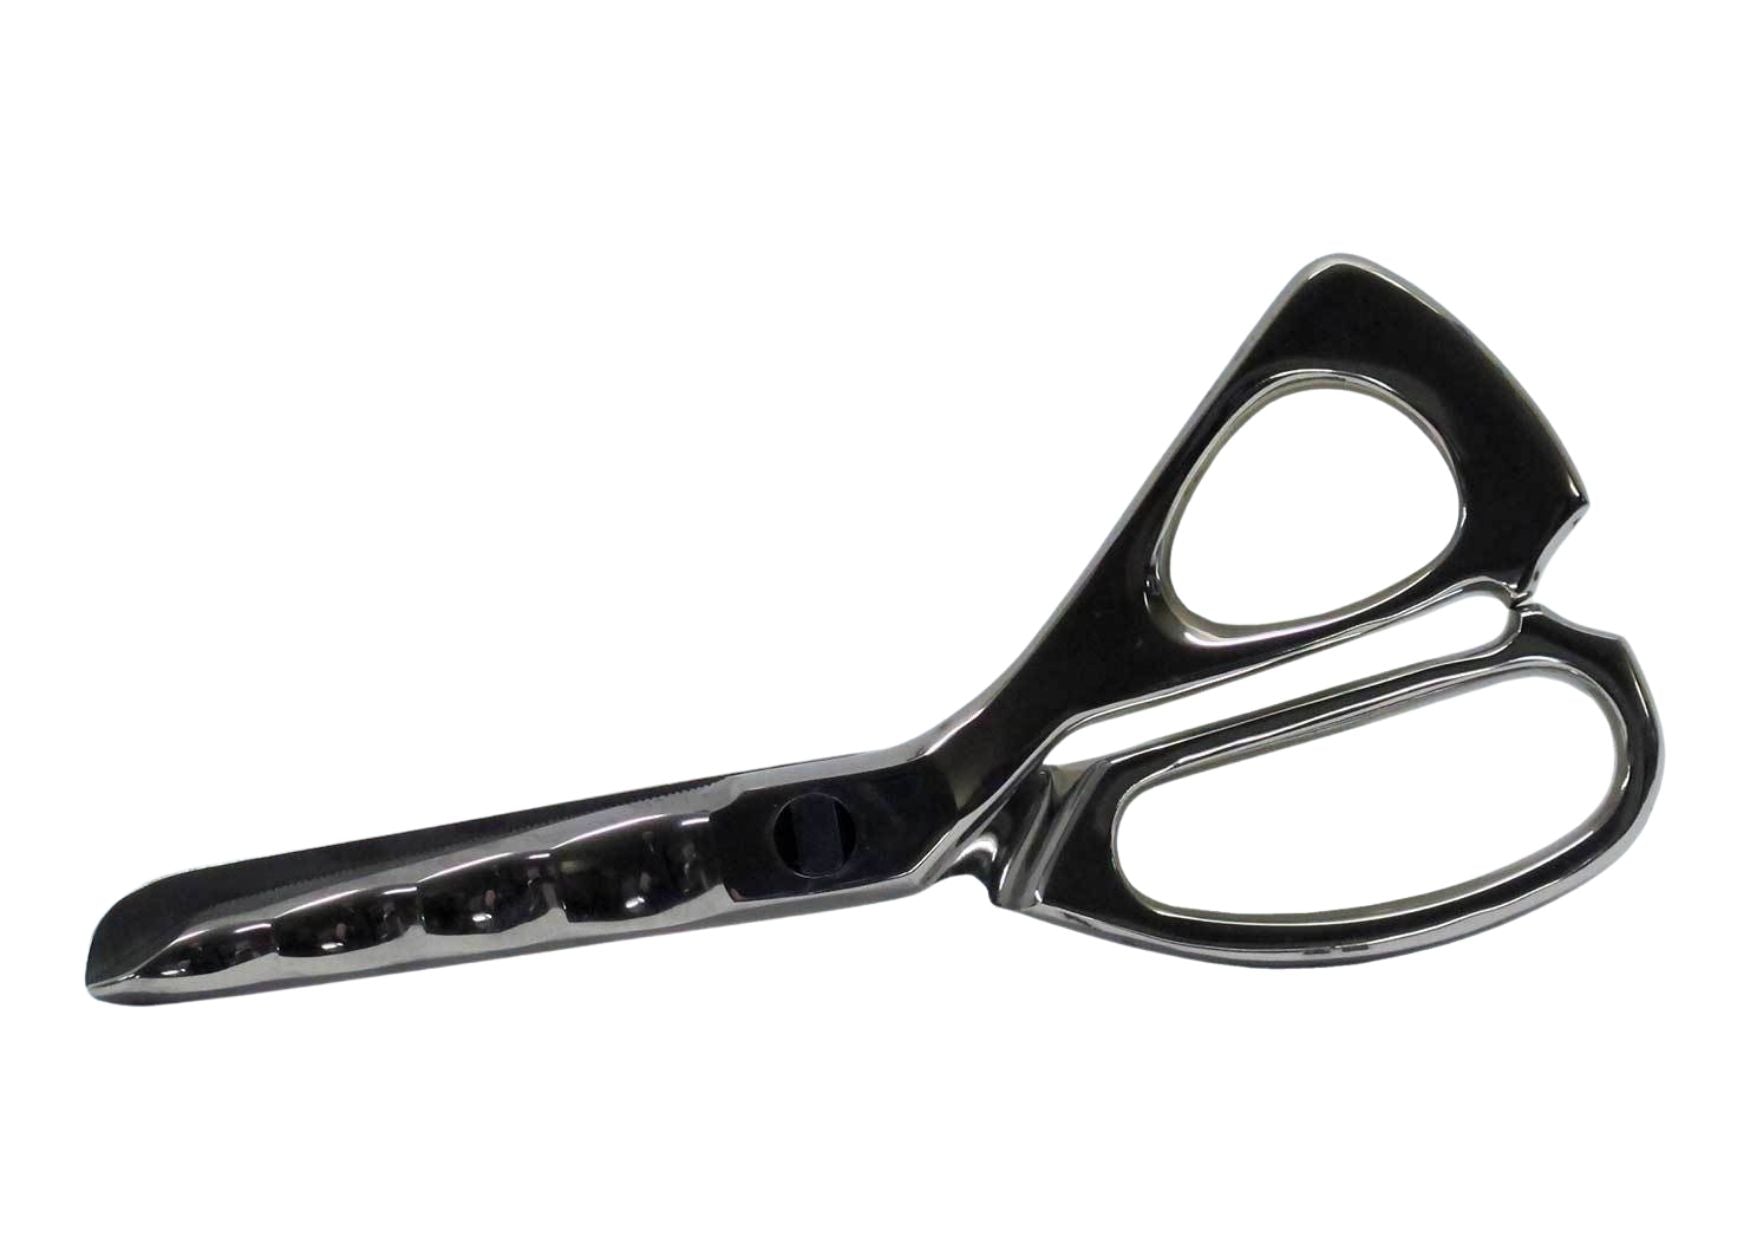 Lavabis multifunction rescue shears with holster stainless steel